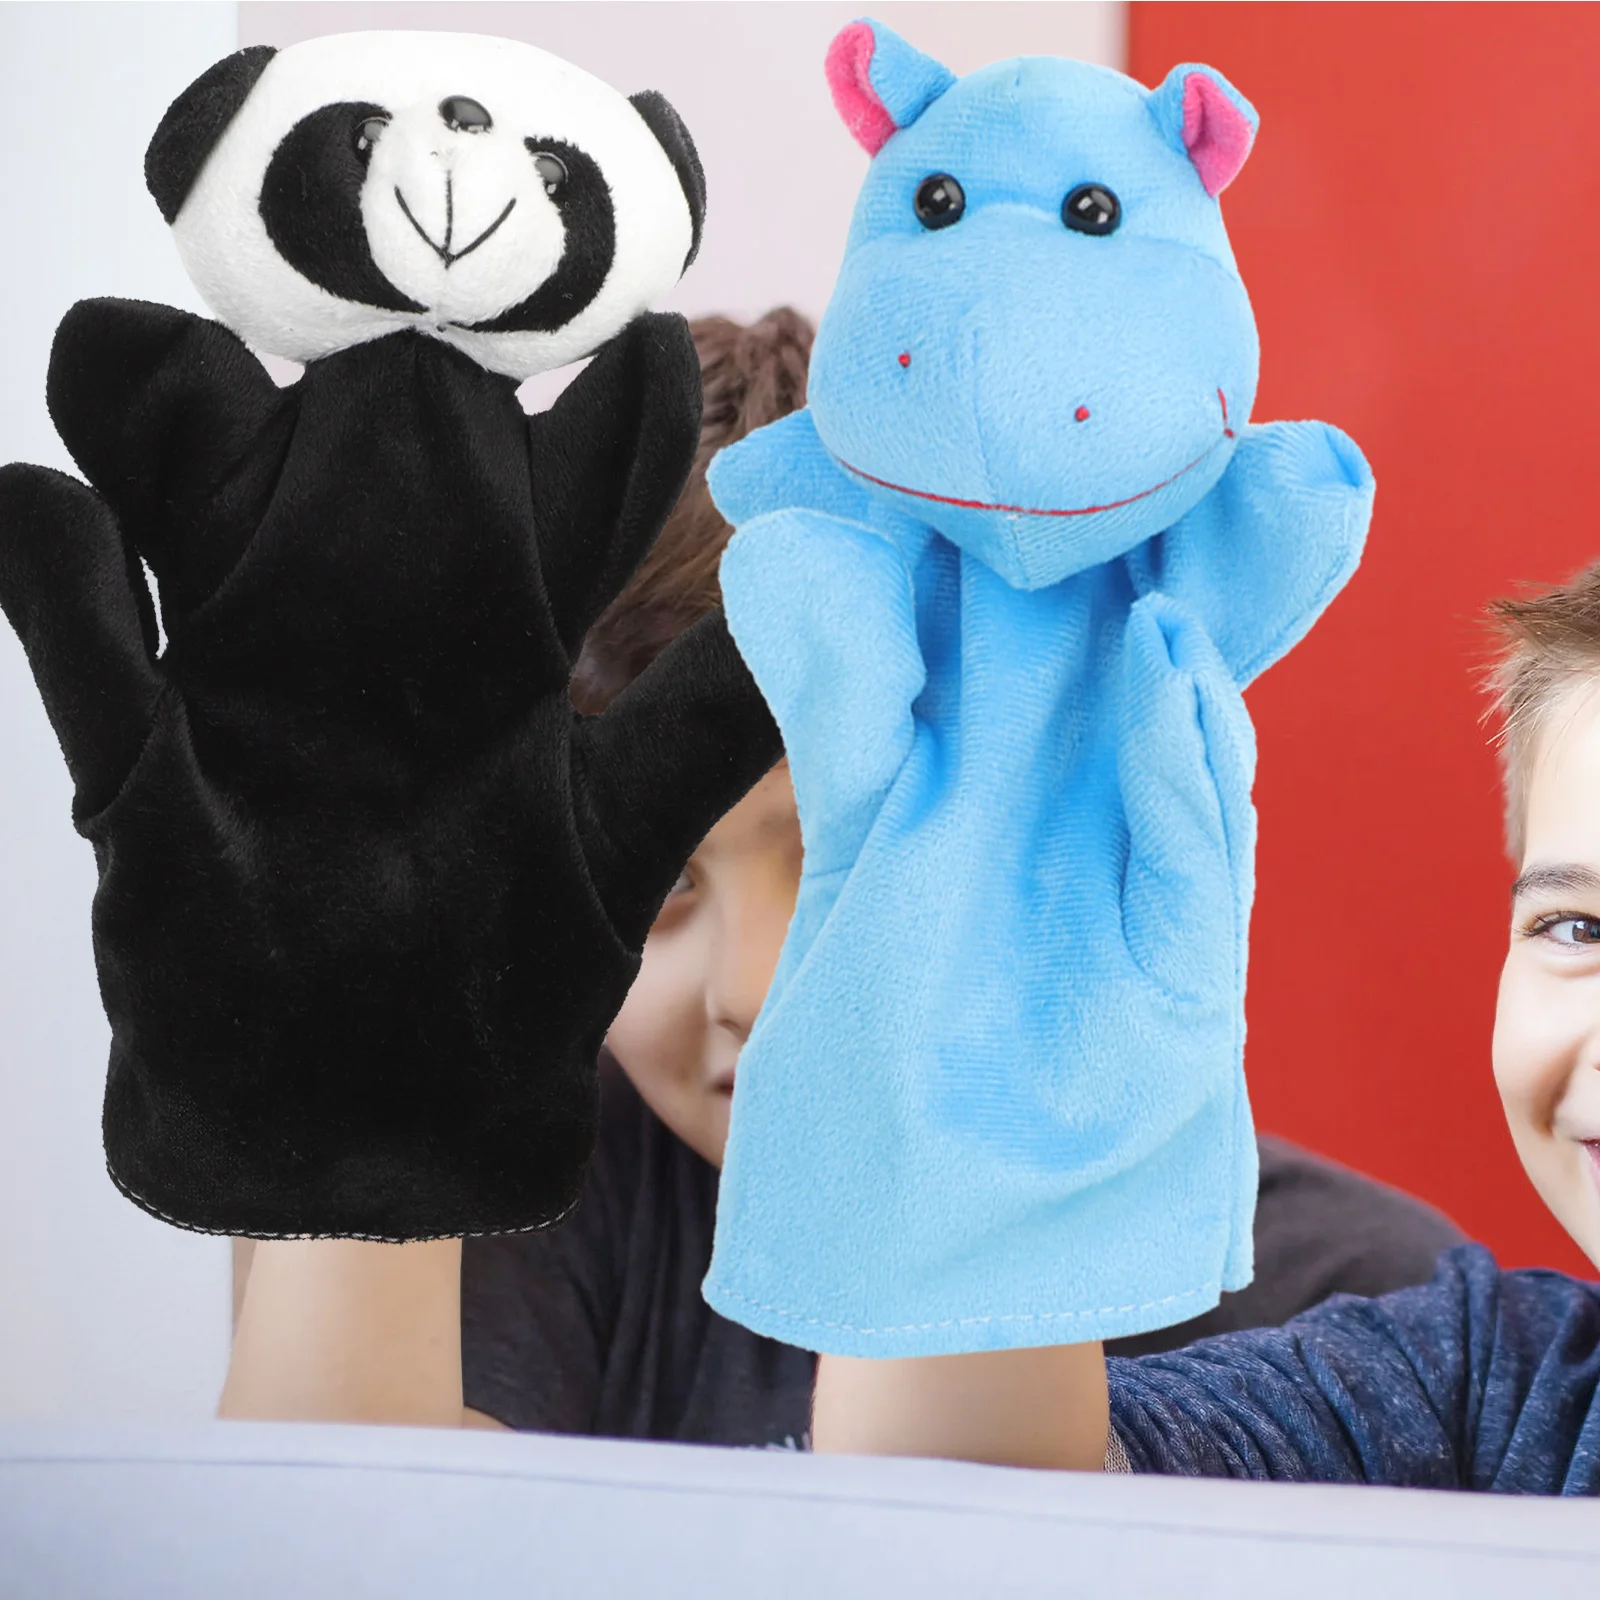 

3 Pcs Hand Puppet Toys Animal Kids Puppets Educational Cartoon Toddlers Cotton Hands Adults